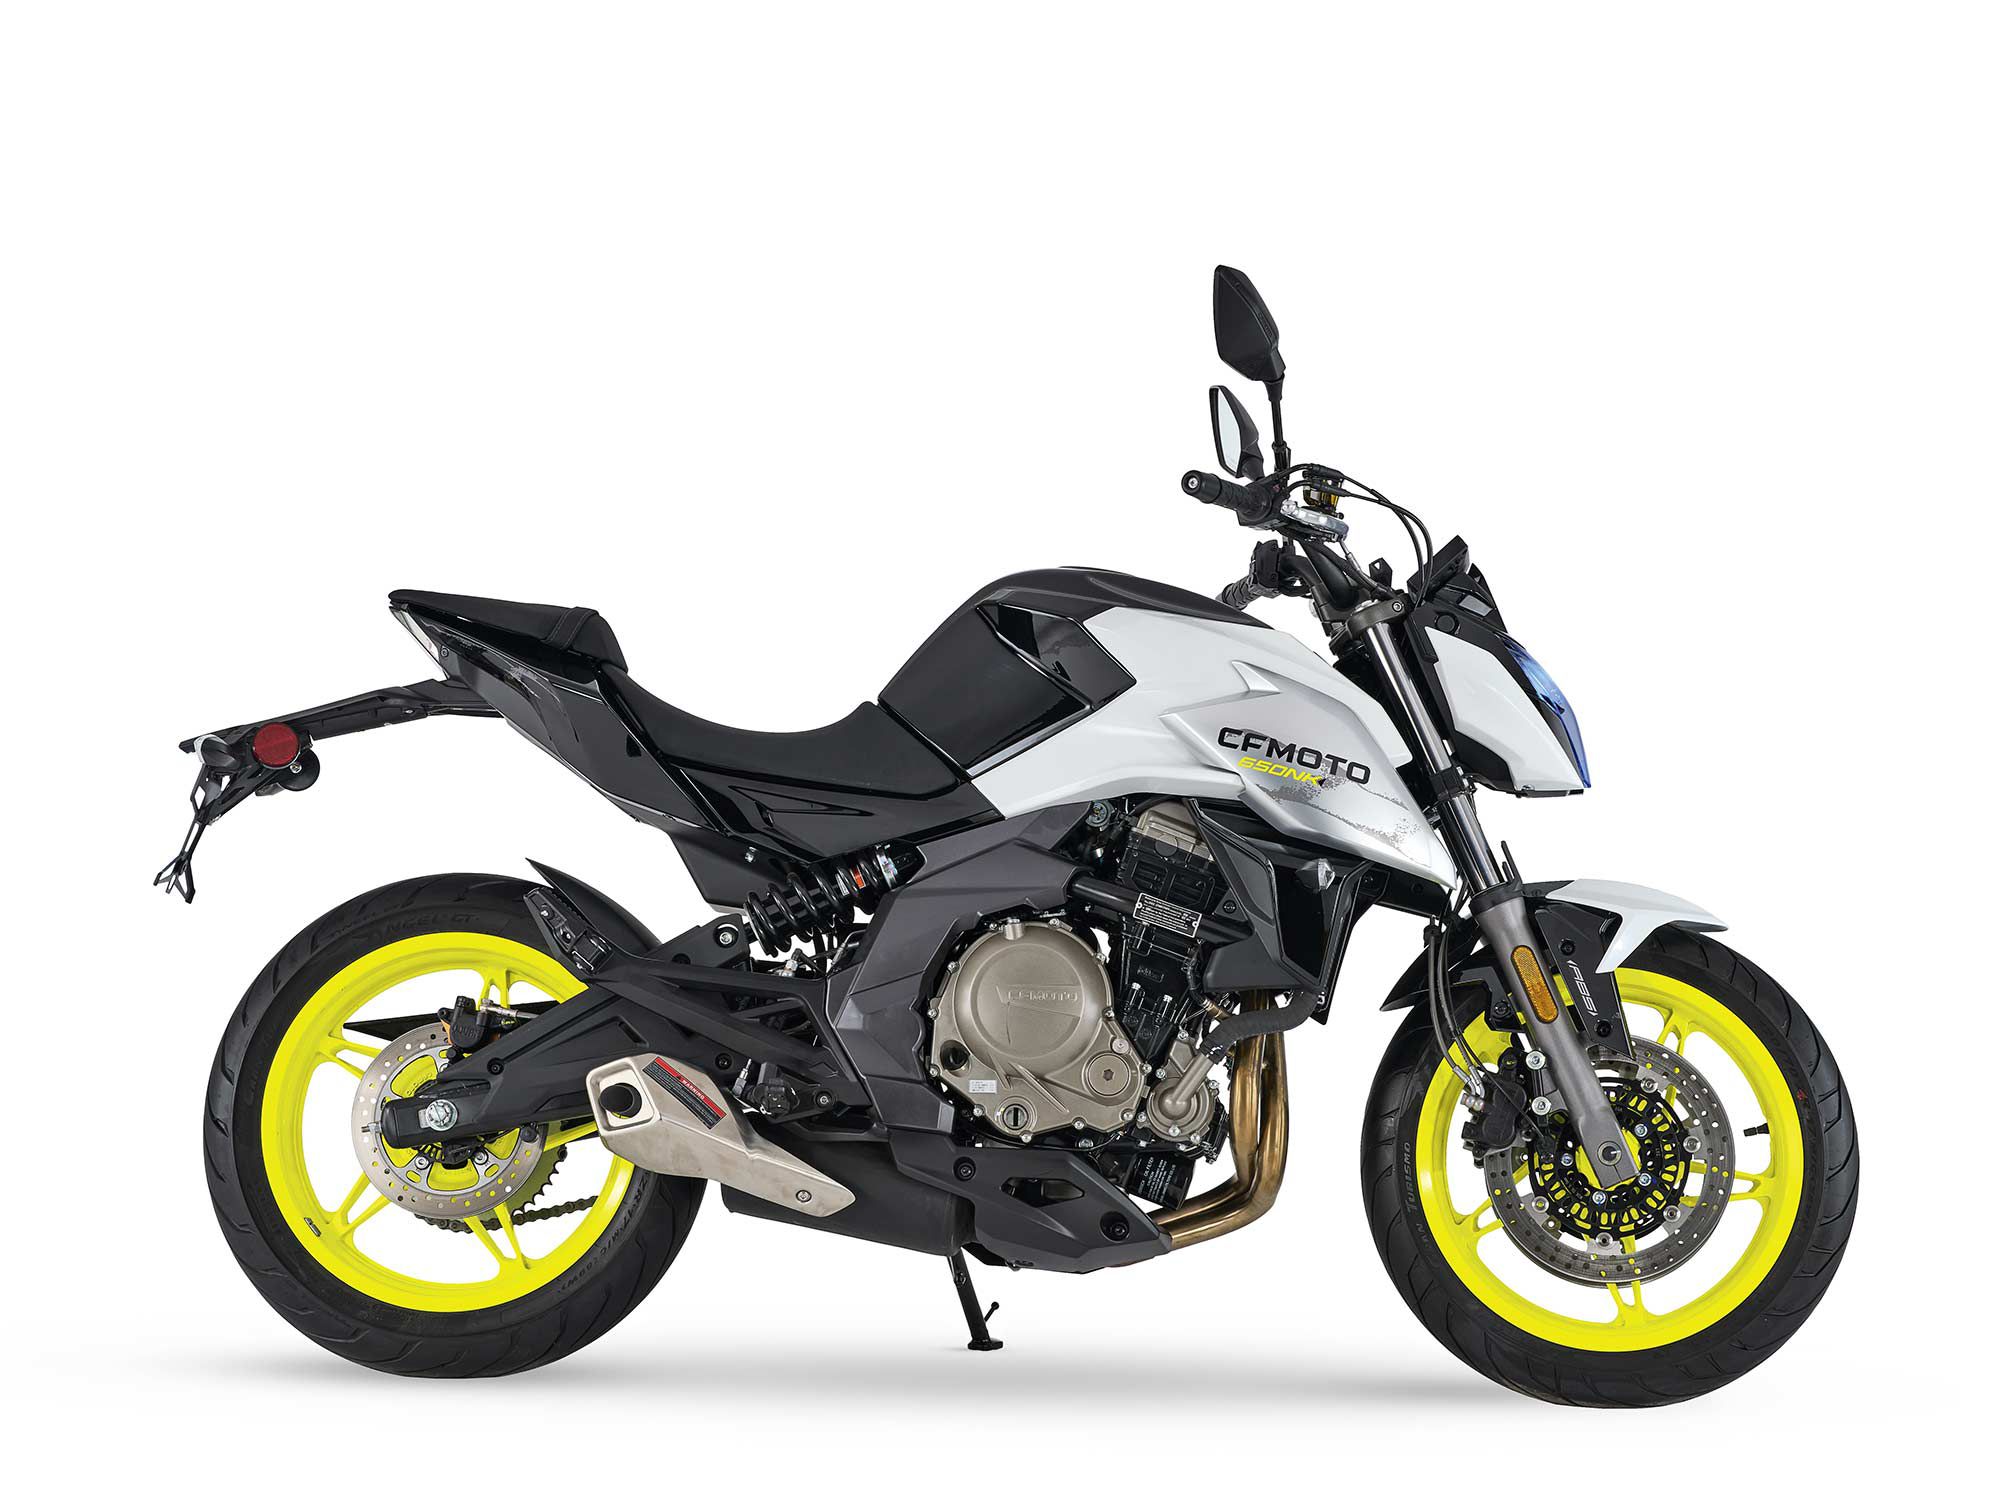 CFMOTO’s 650NK sports minimalistic styling and a classic, upright riding position for around-town riding.